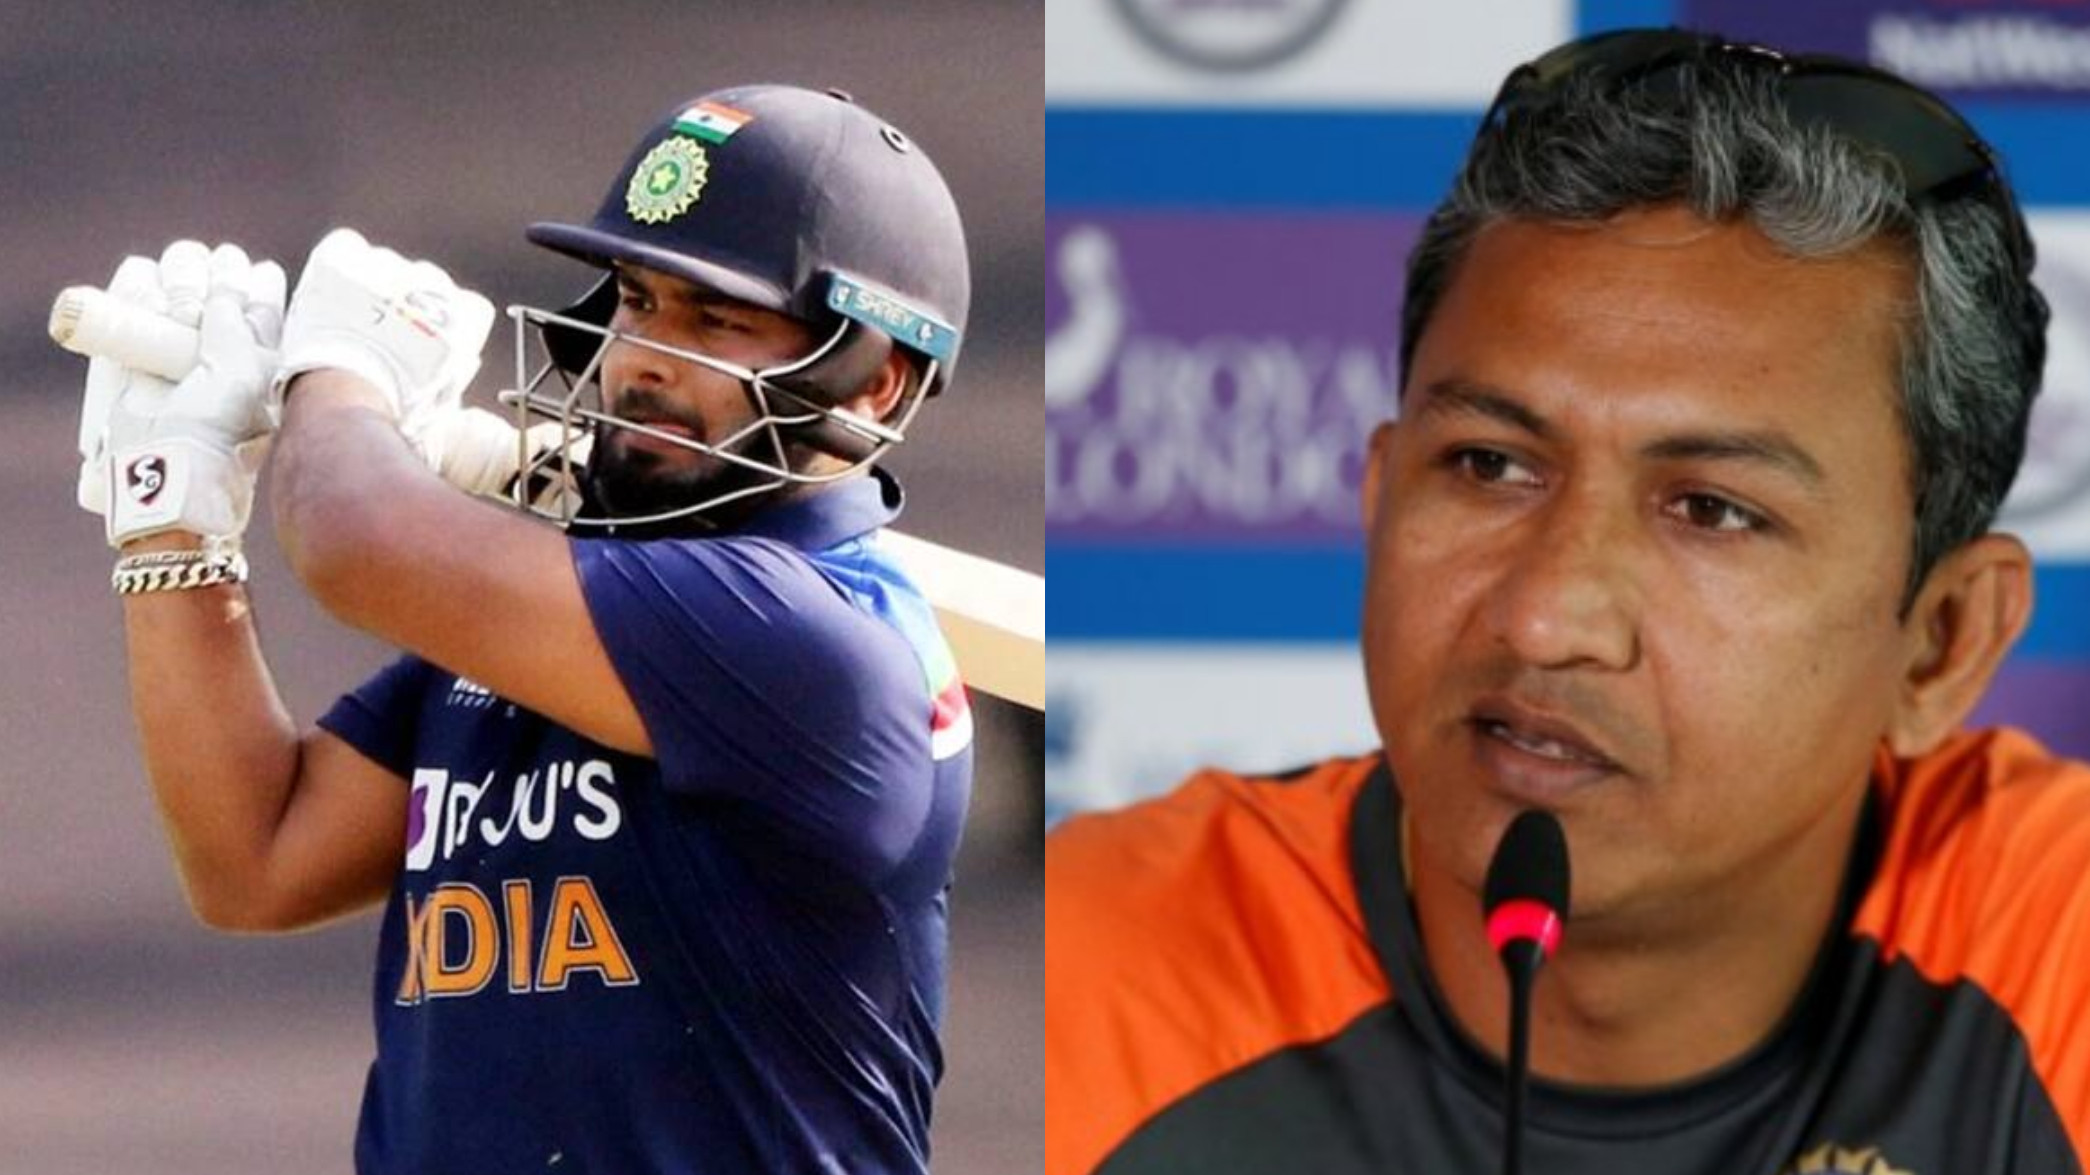 SA v IND 2021-22: ‘He is yet to come good’: Sanjay Bangar on Rishabh Pant’s batting flaws in ODI cricket